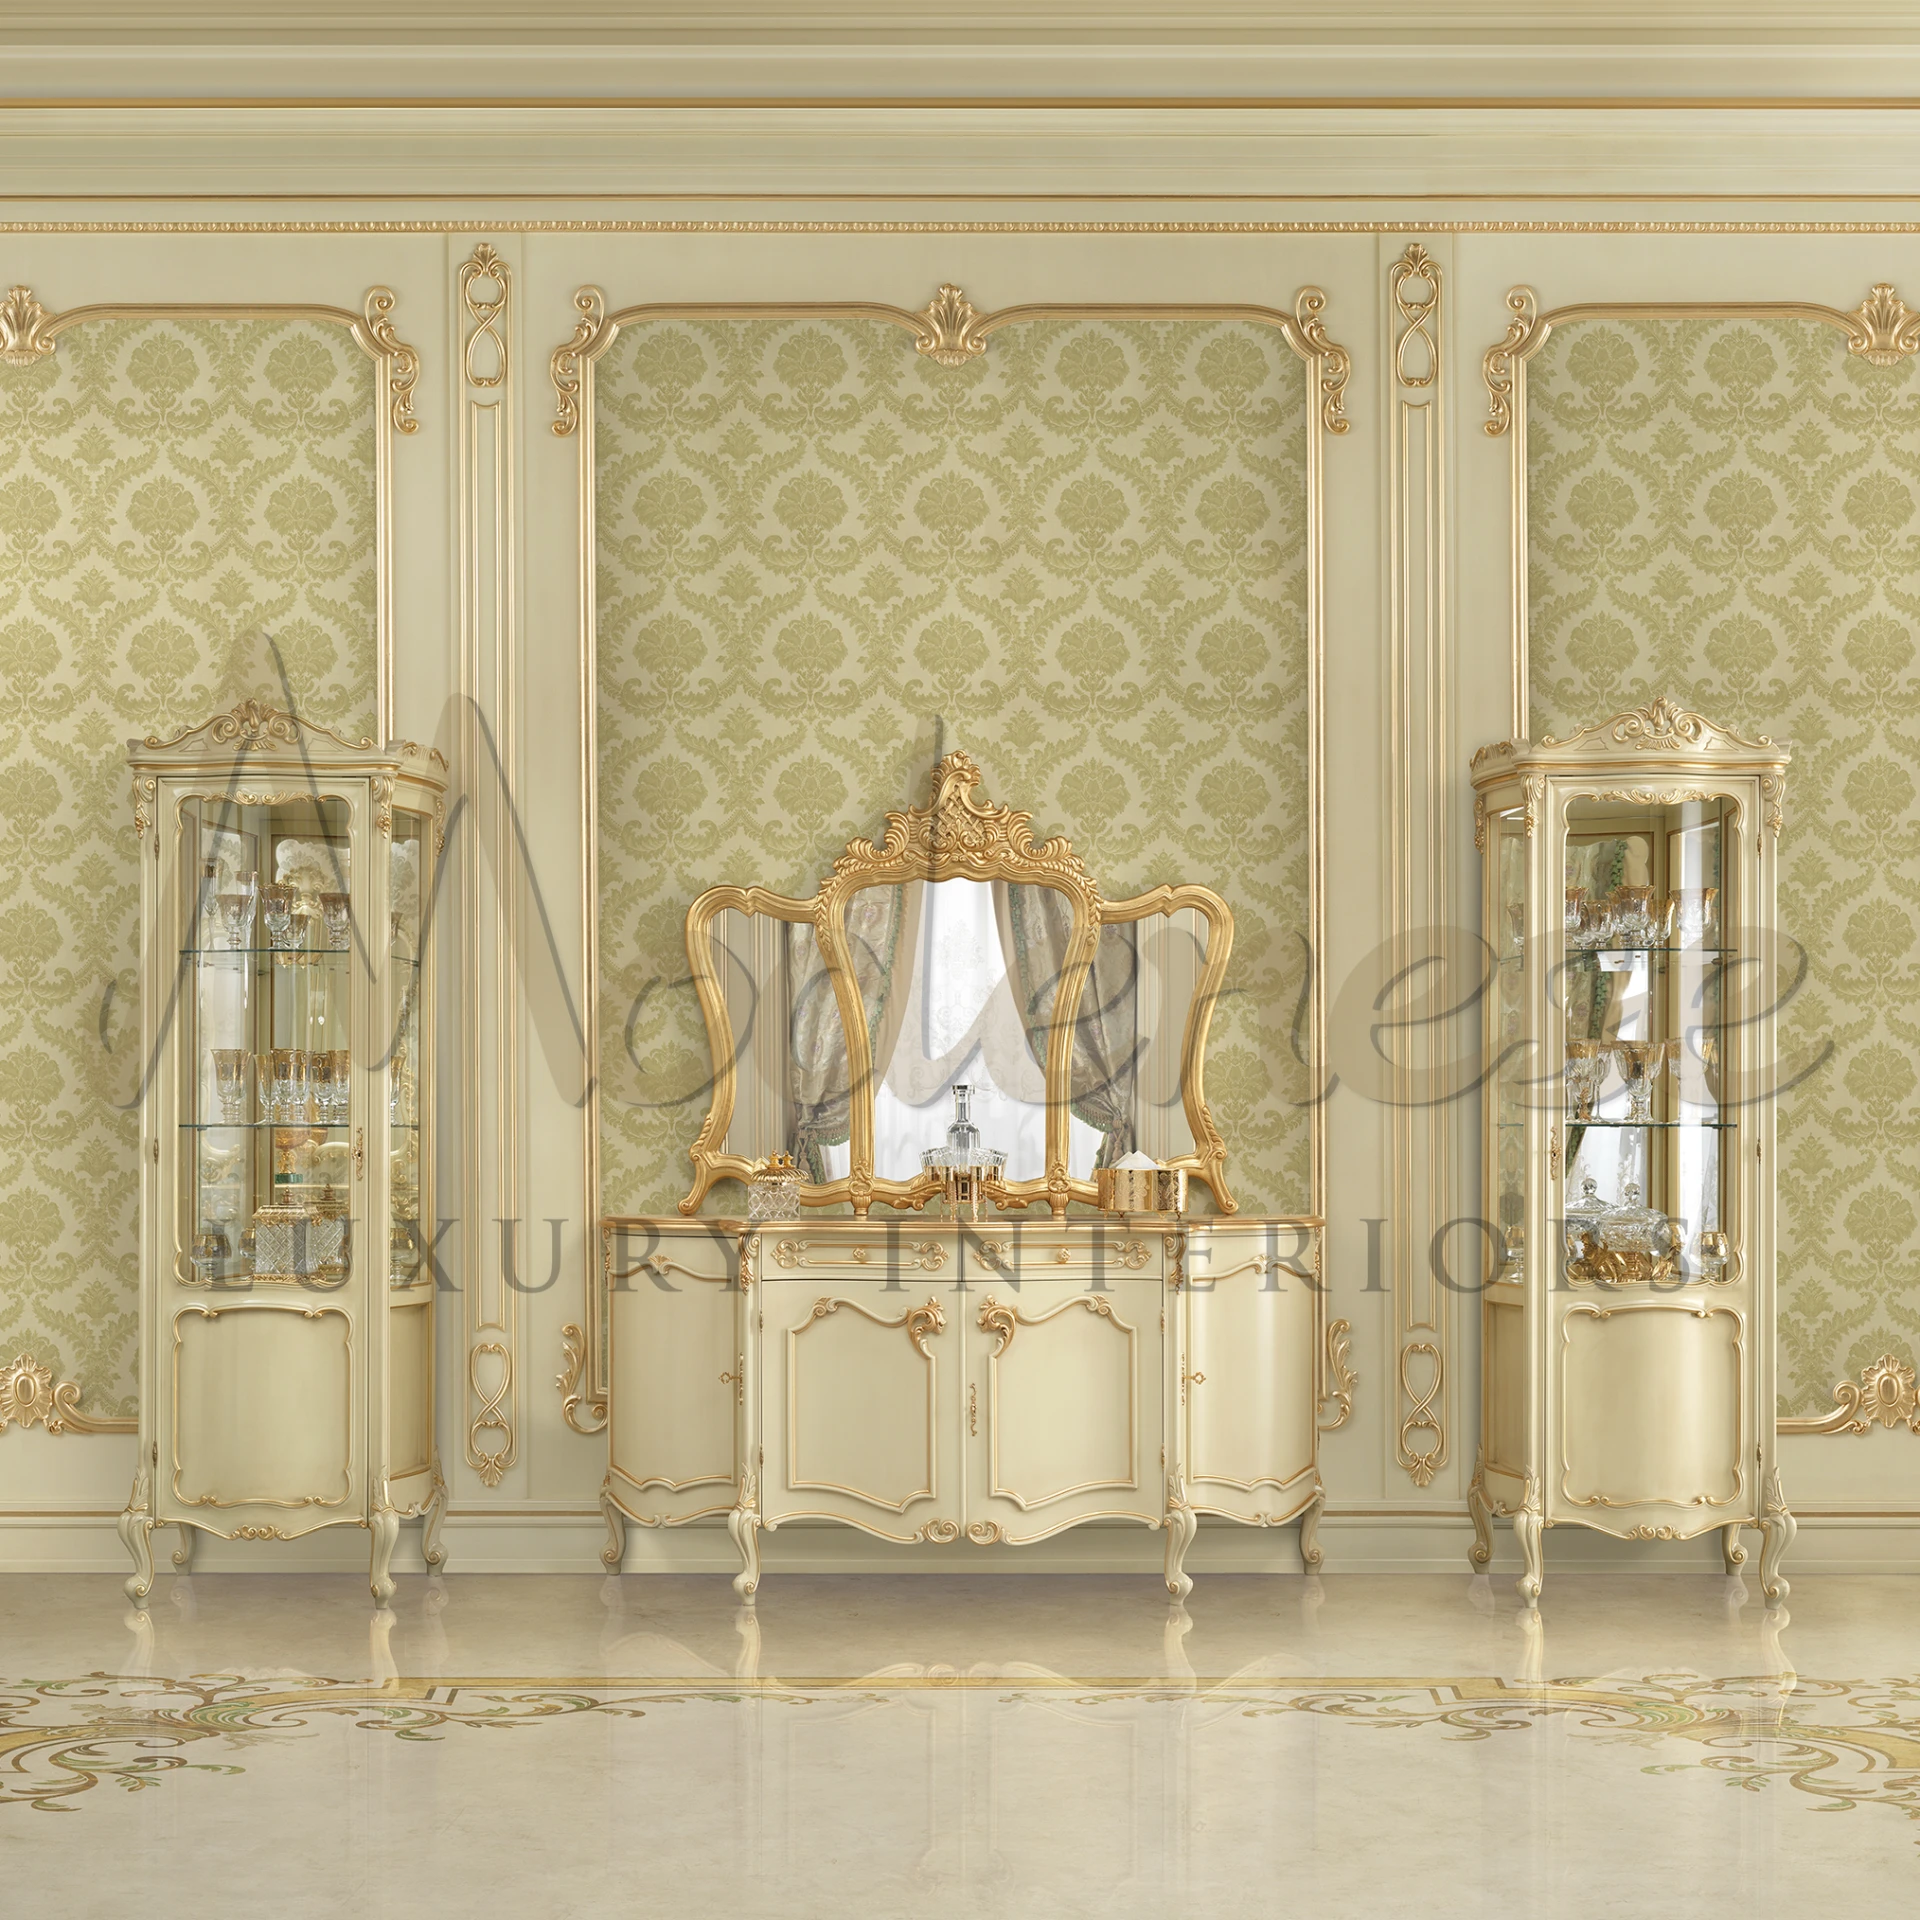 A luxurious dressing area with stylish cabinets, a three-panel mirror, and golden decorative objects